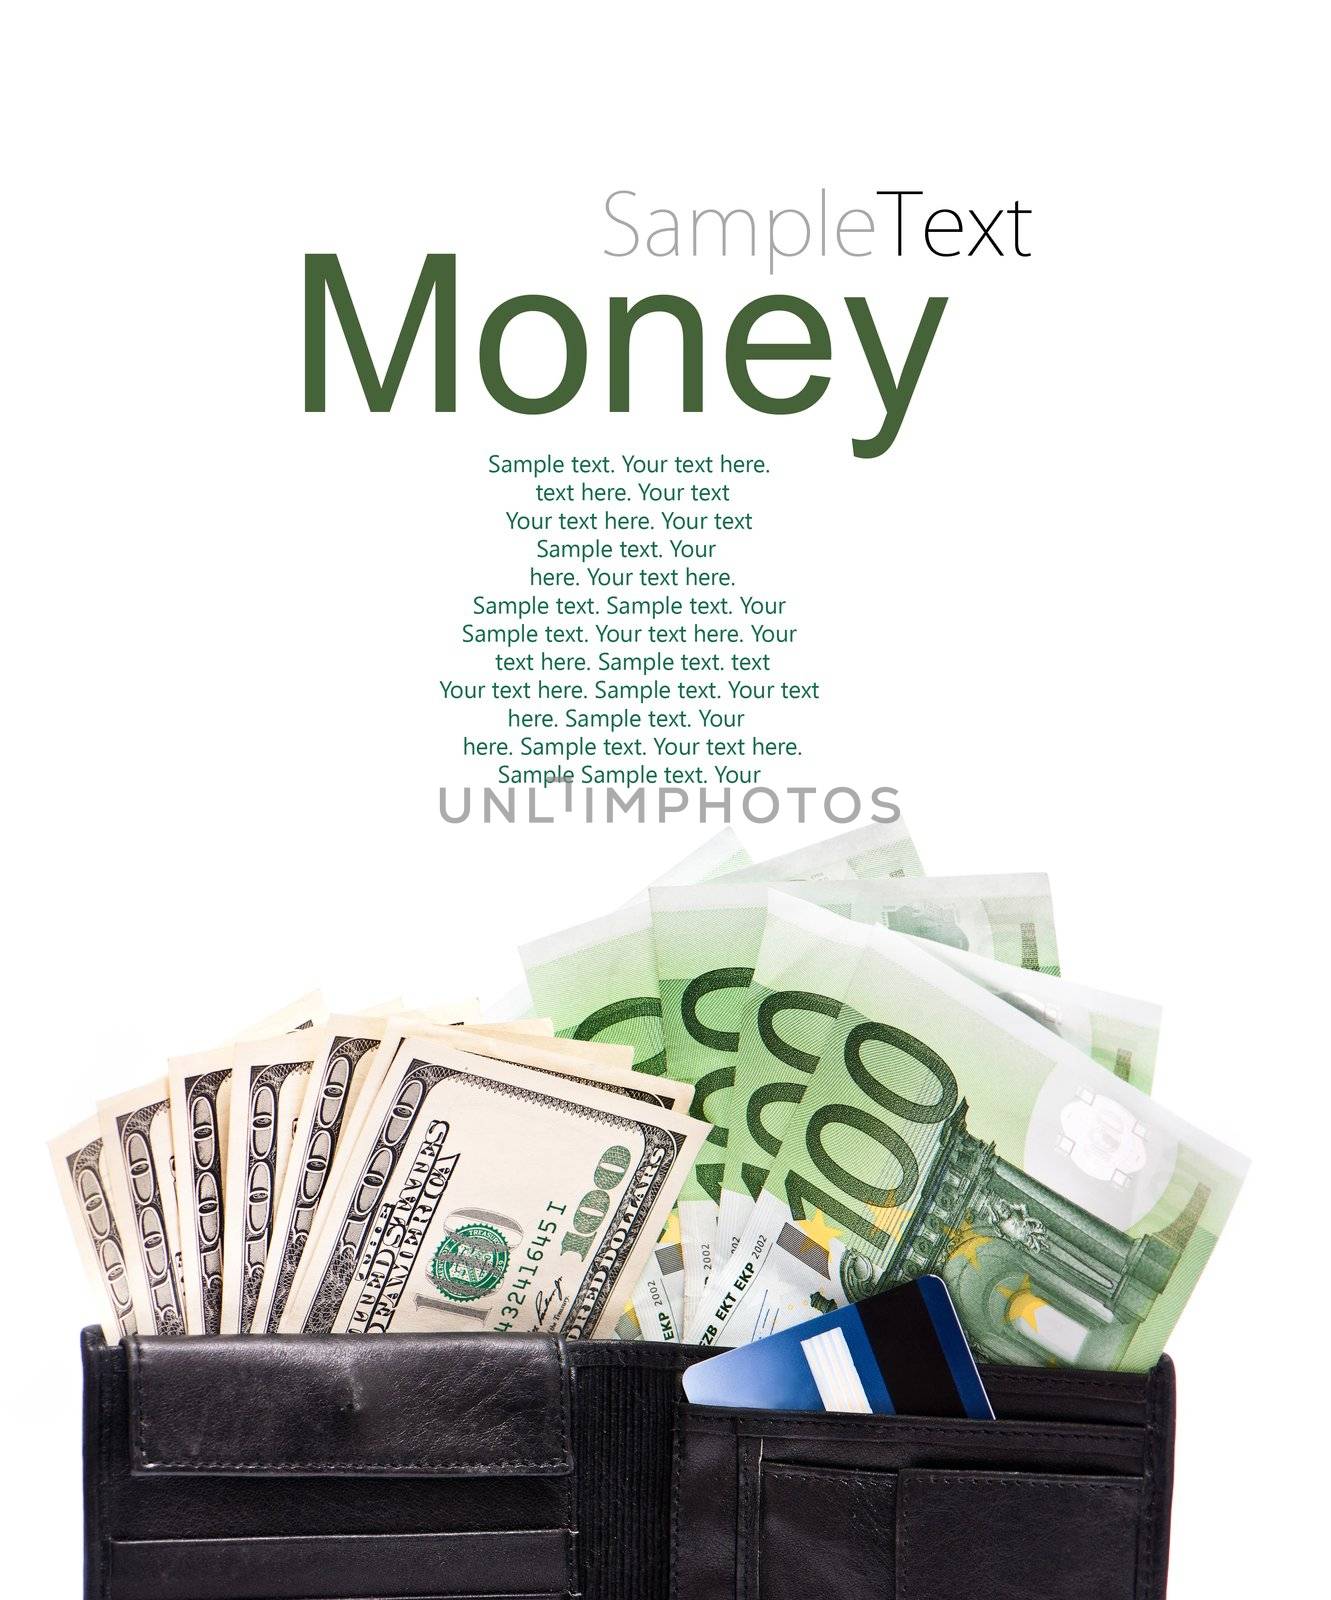 wallet with euro banknotes, dollars and credit cards with sample text